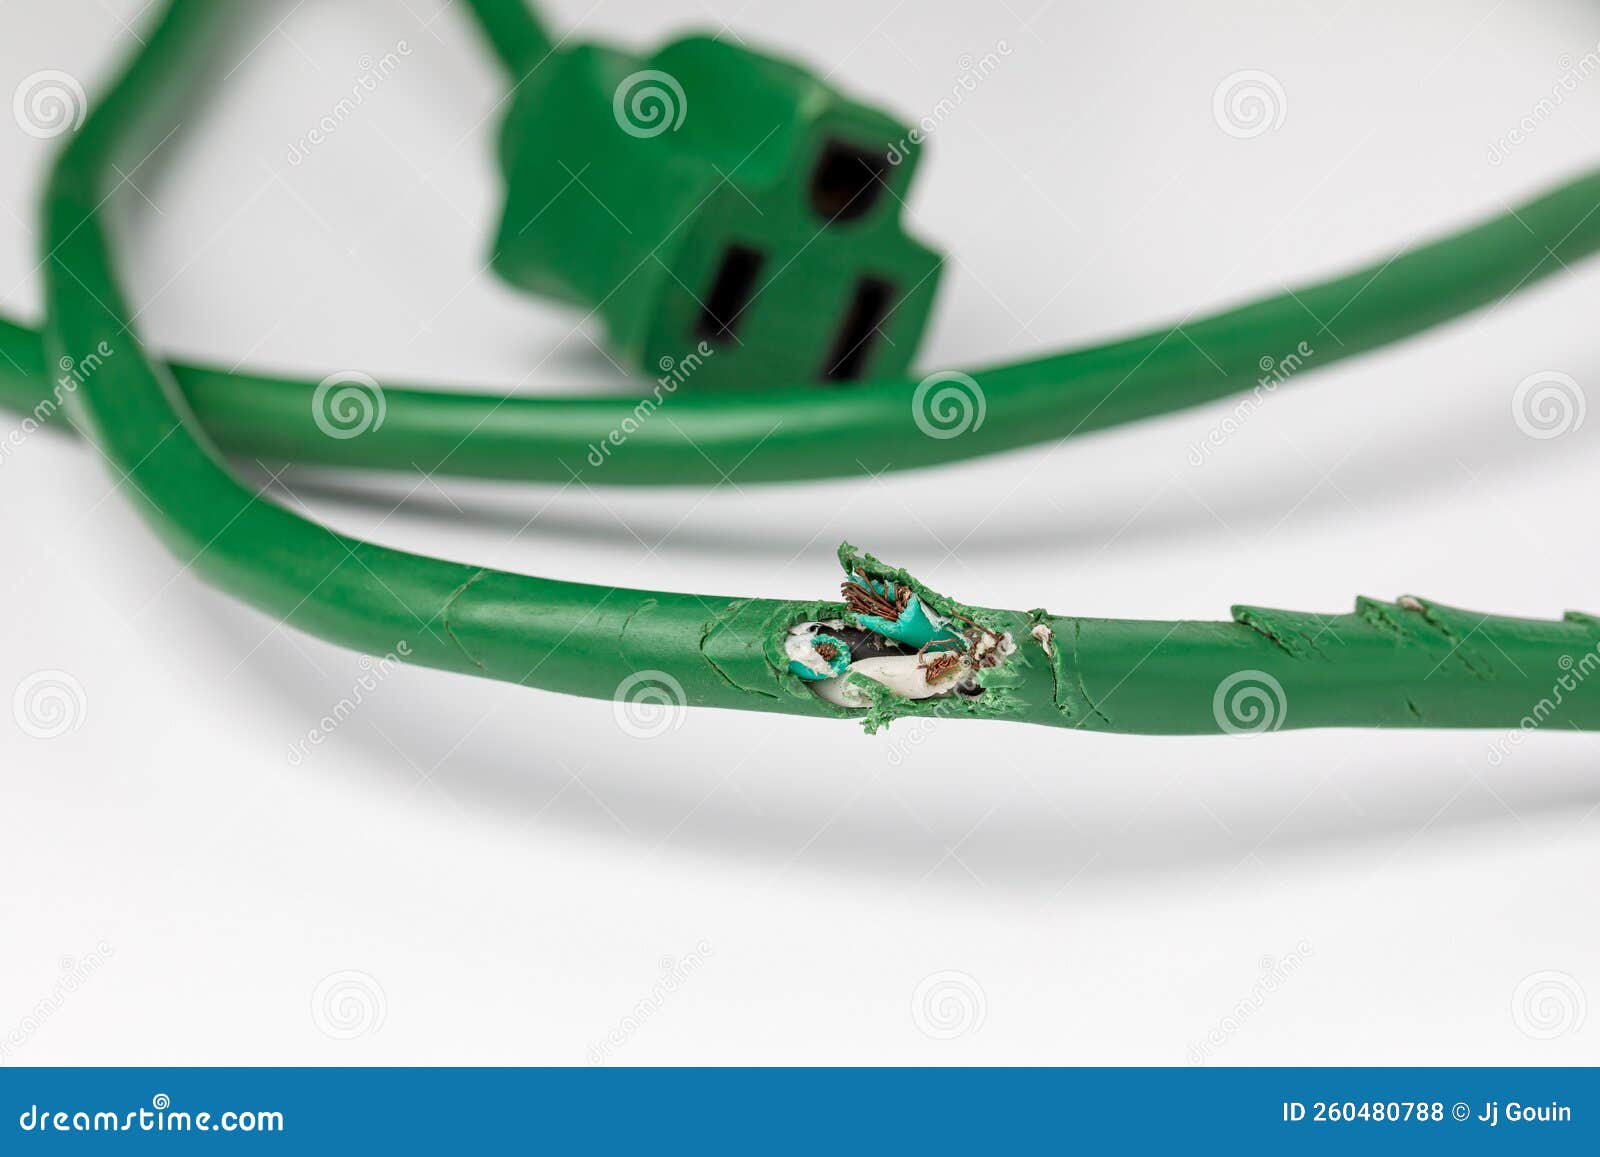 https://thumbs.dreamstime.com/z/electrical-extension-cord-wiring-damage-mice-rodent-control-mouse-infestation-home-repair-concept-260480788.jpg